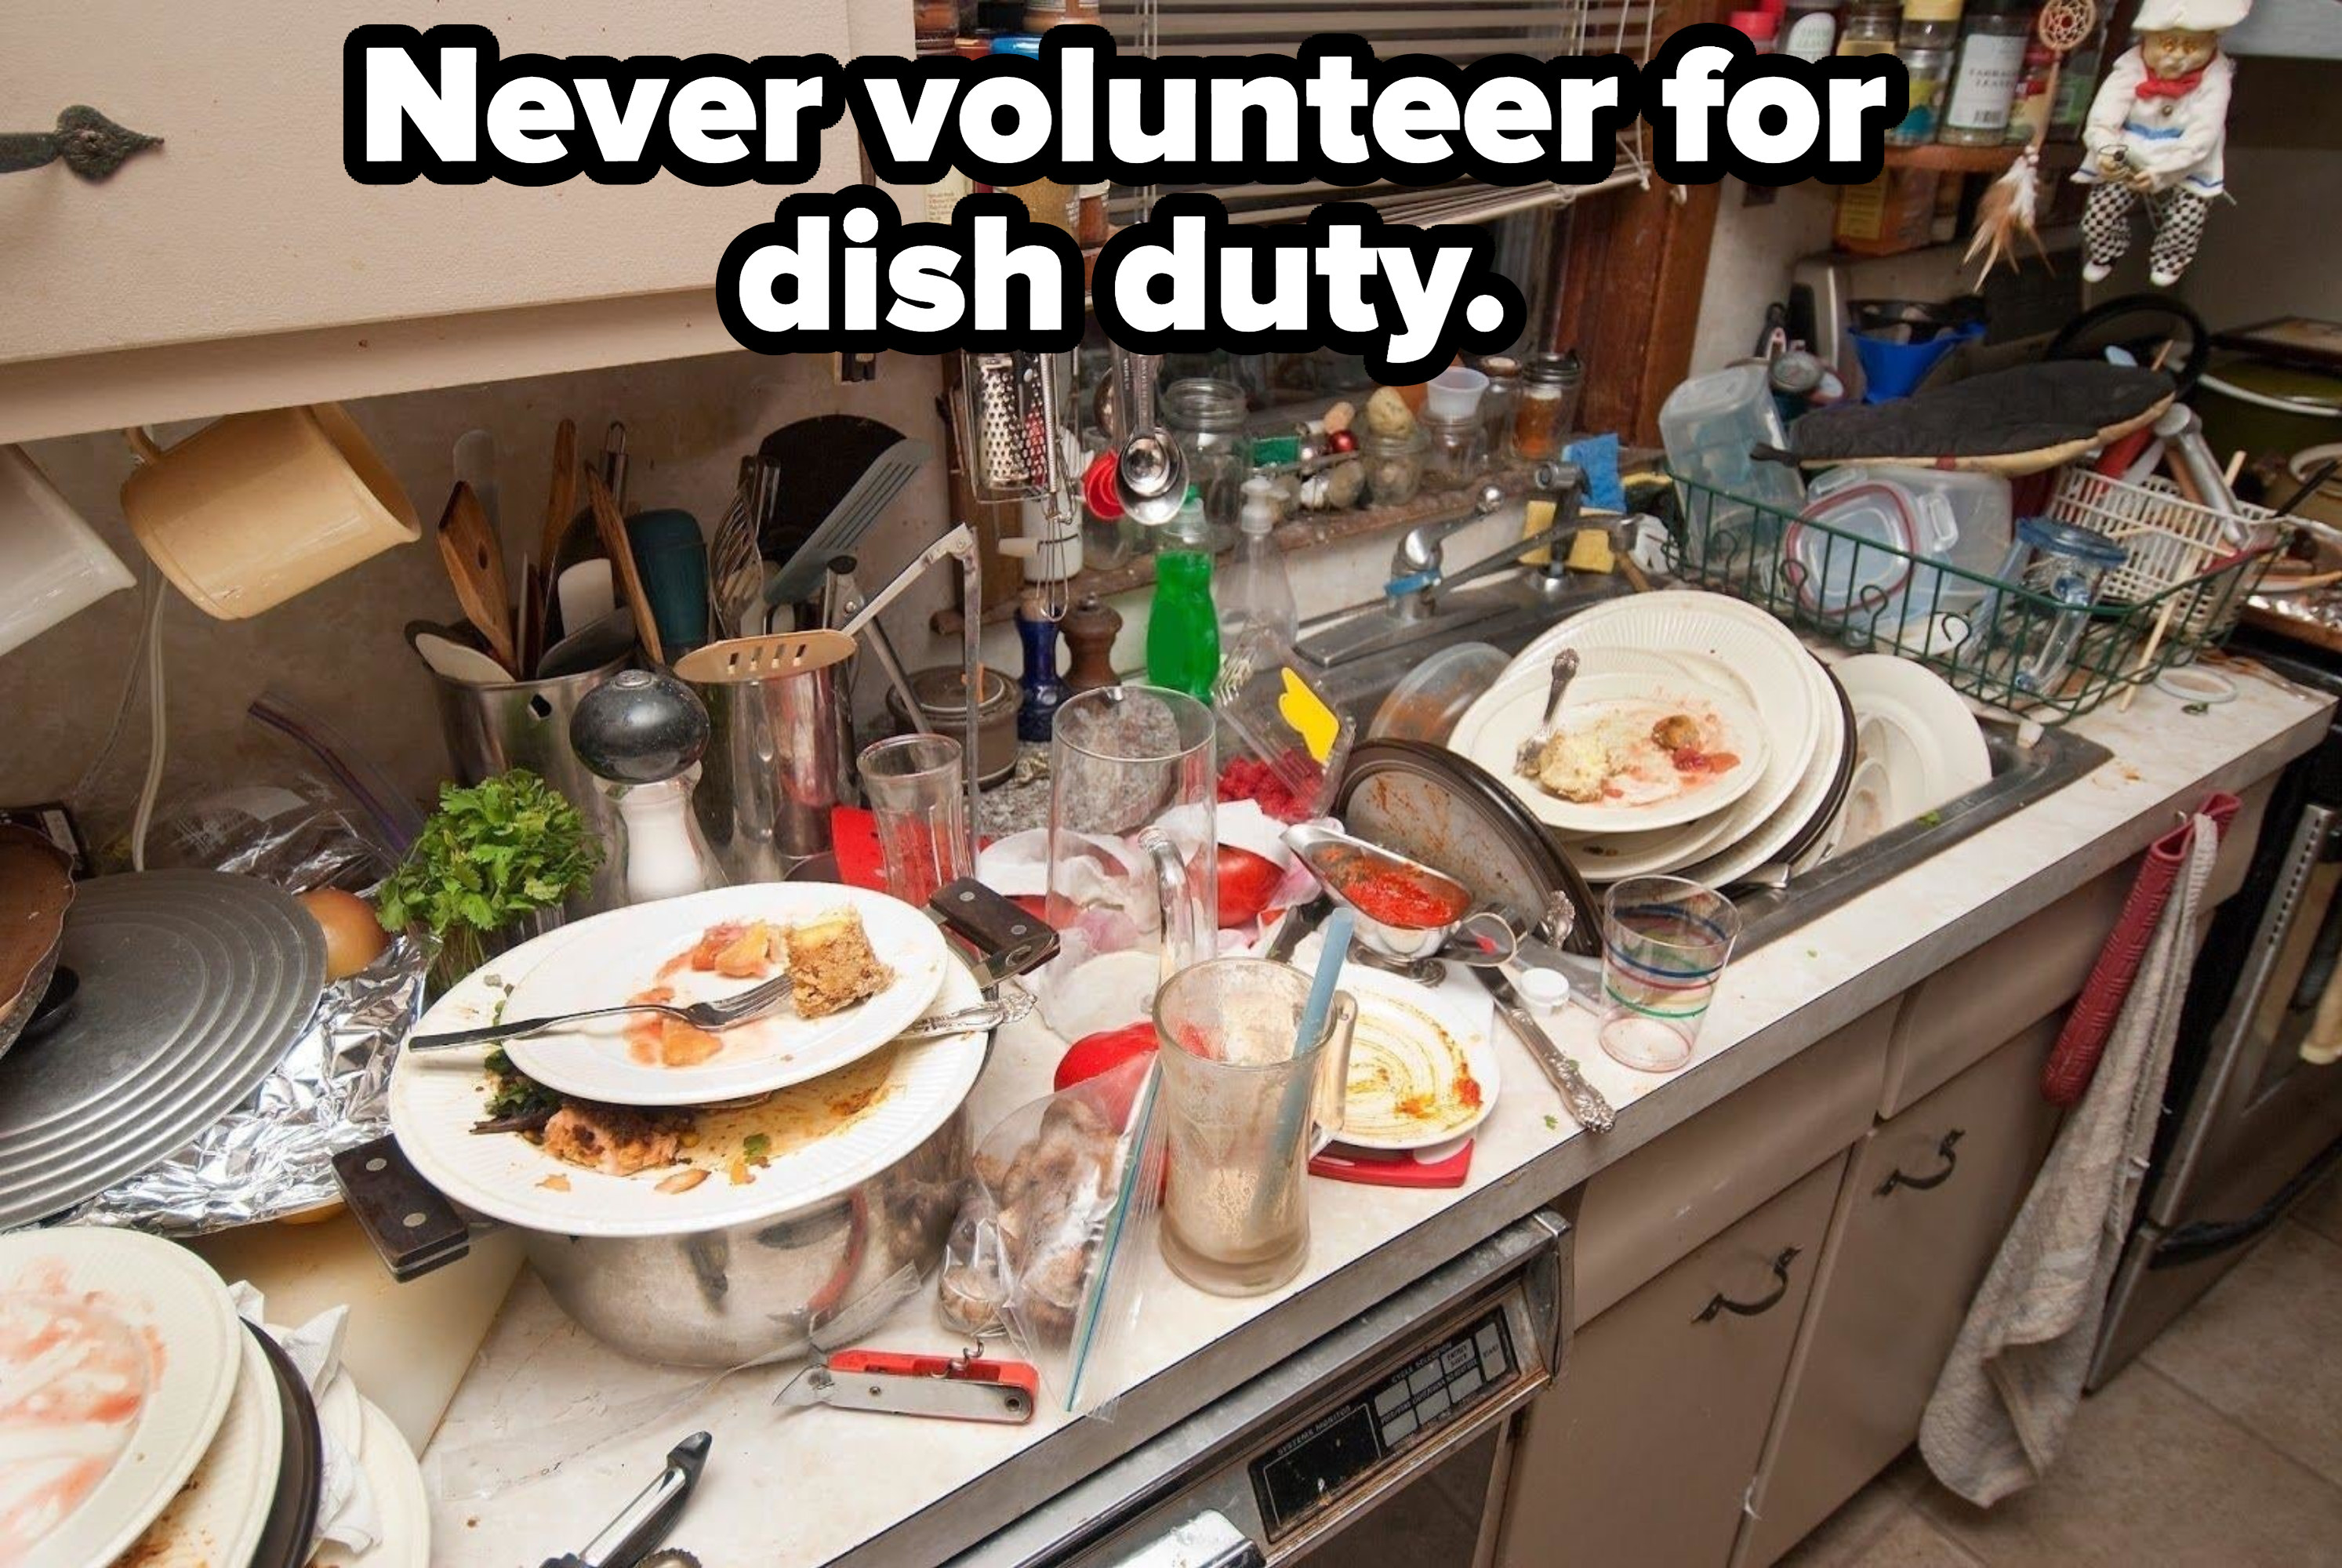 A kitchen with dirty dishes overflowing in the sink and the countertop, with the caption &quot;Never volunteer for dish duty&quot;